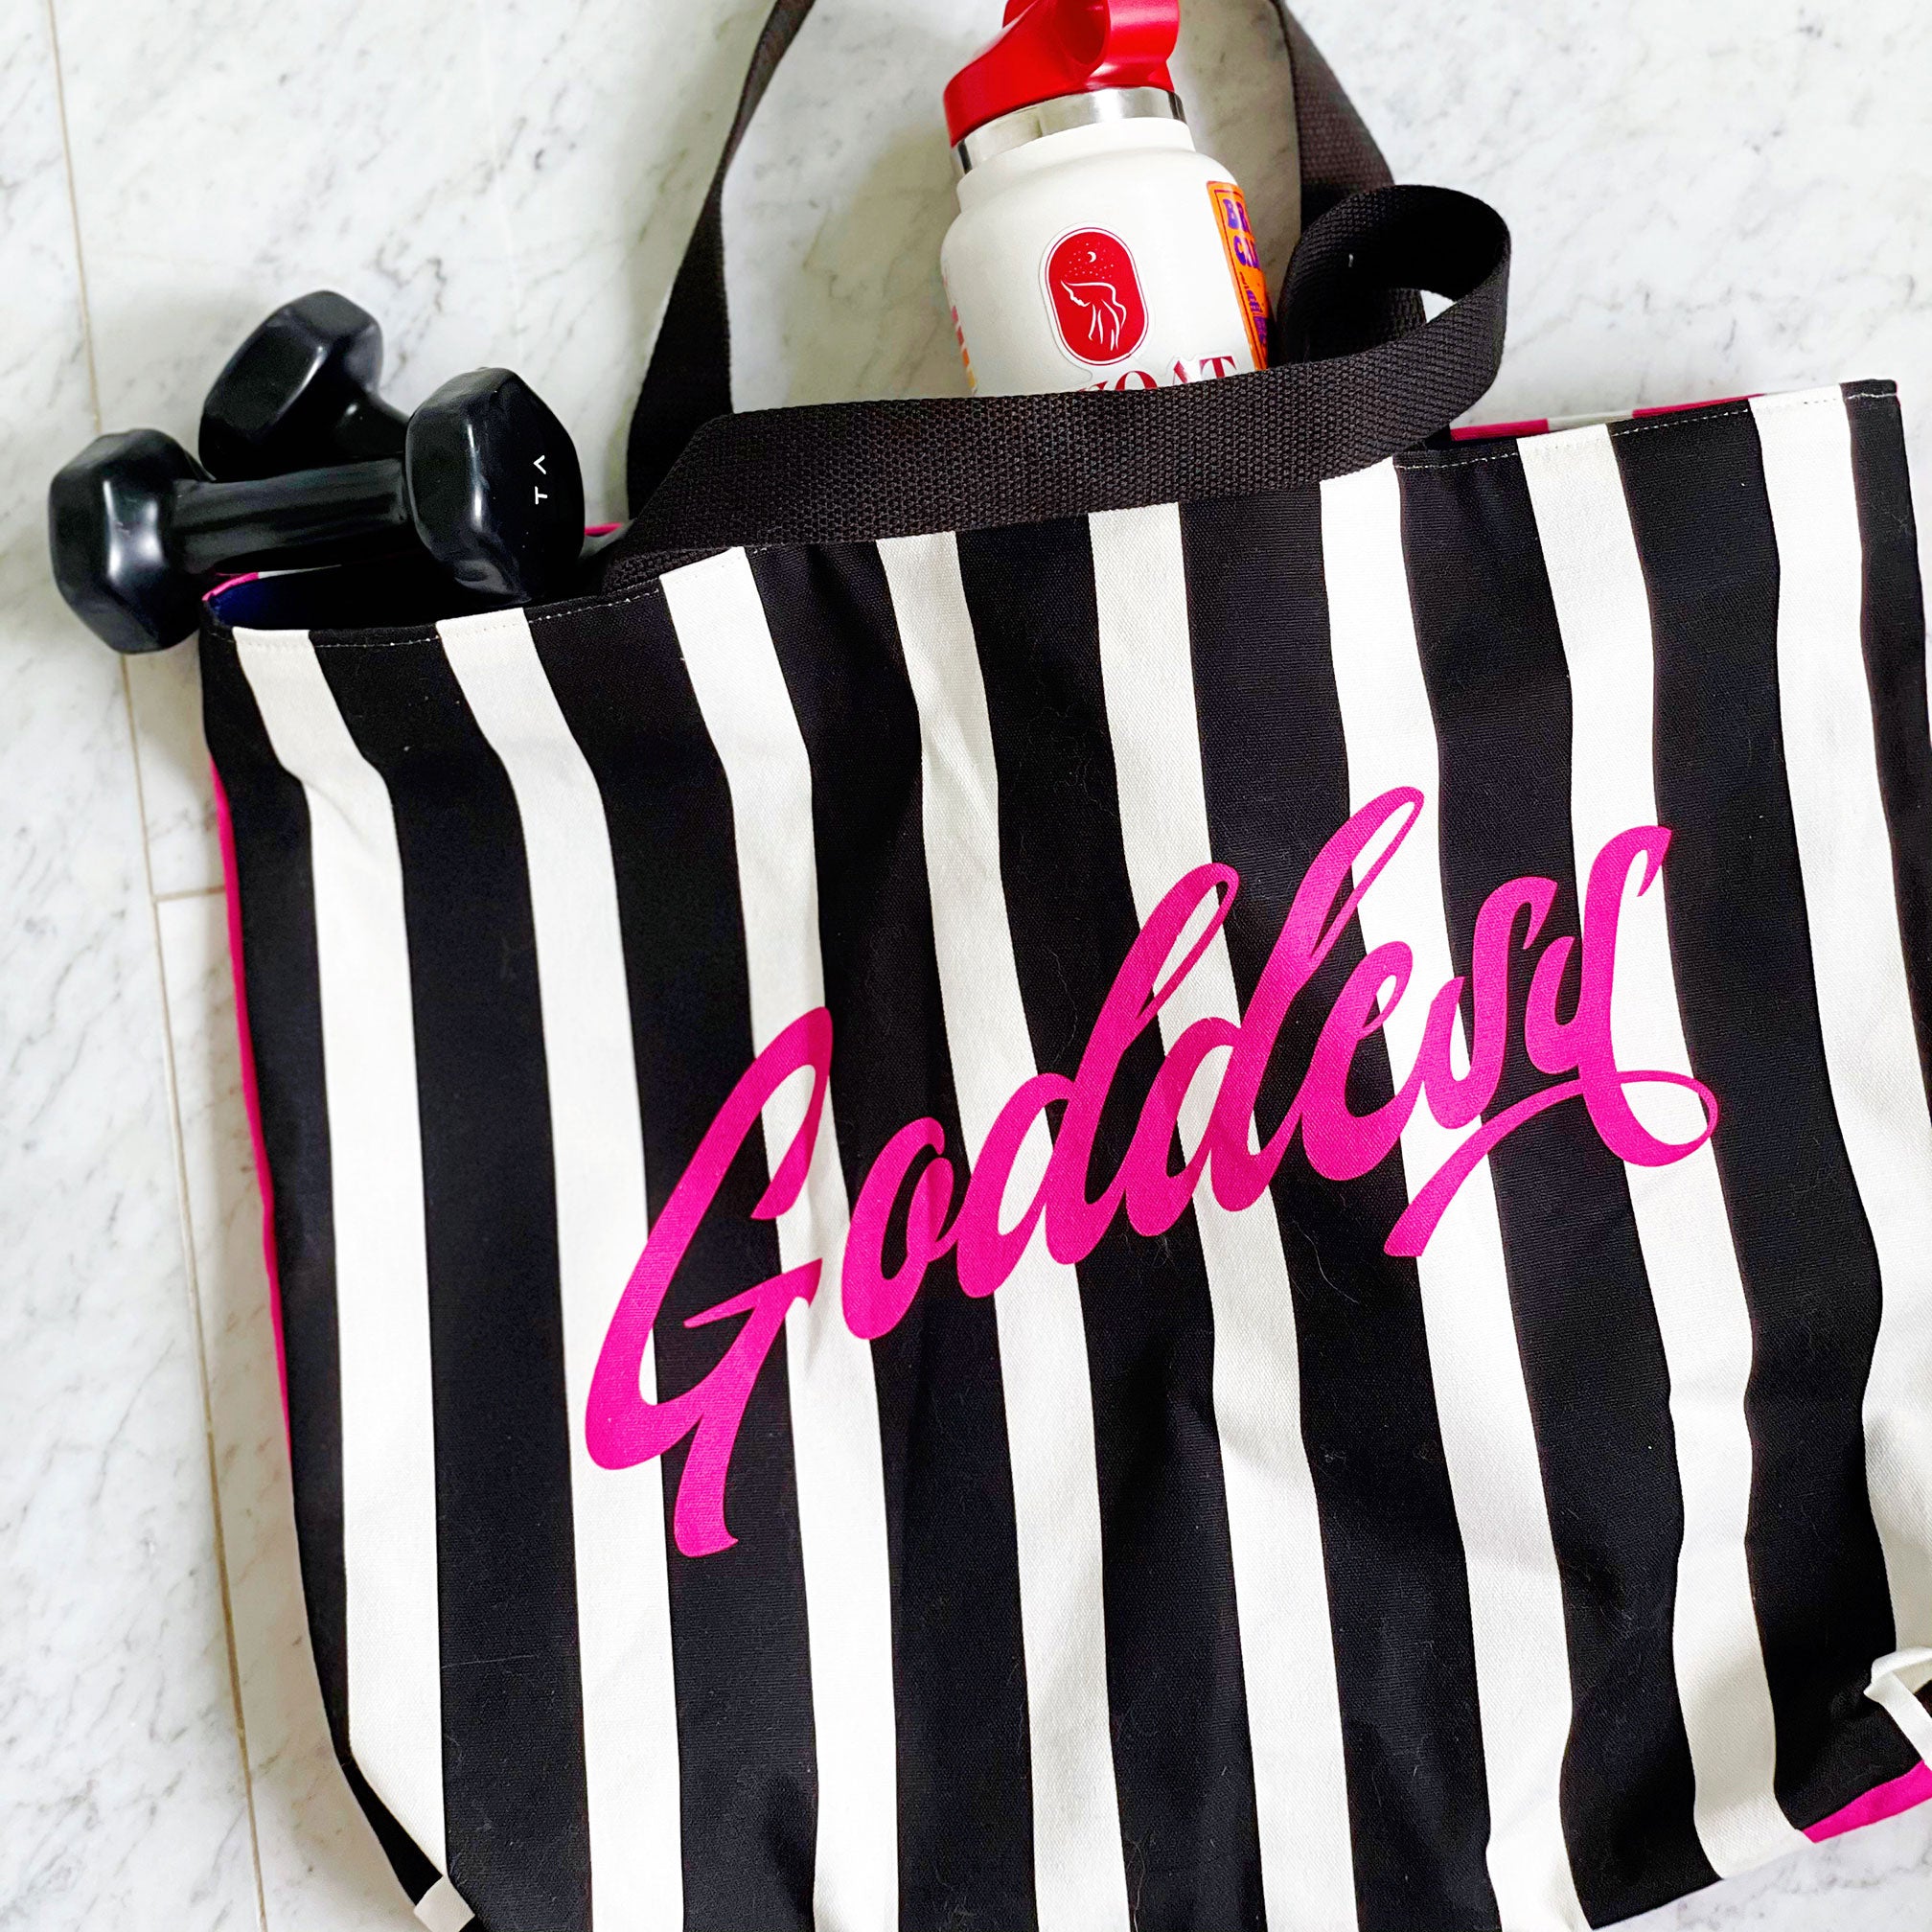 Black and pink striped luxe tote bag with the word "Goddess" featured. Fully lined with 2 interior pockets and a magnetic closure.